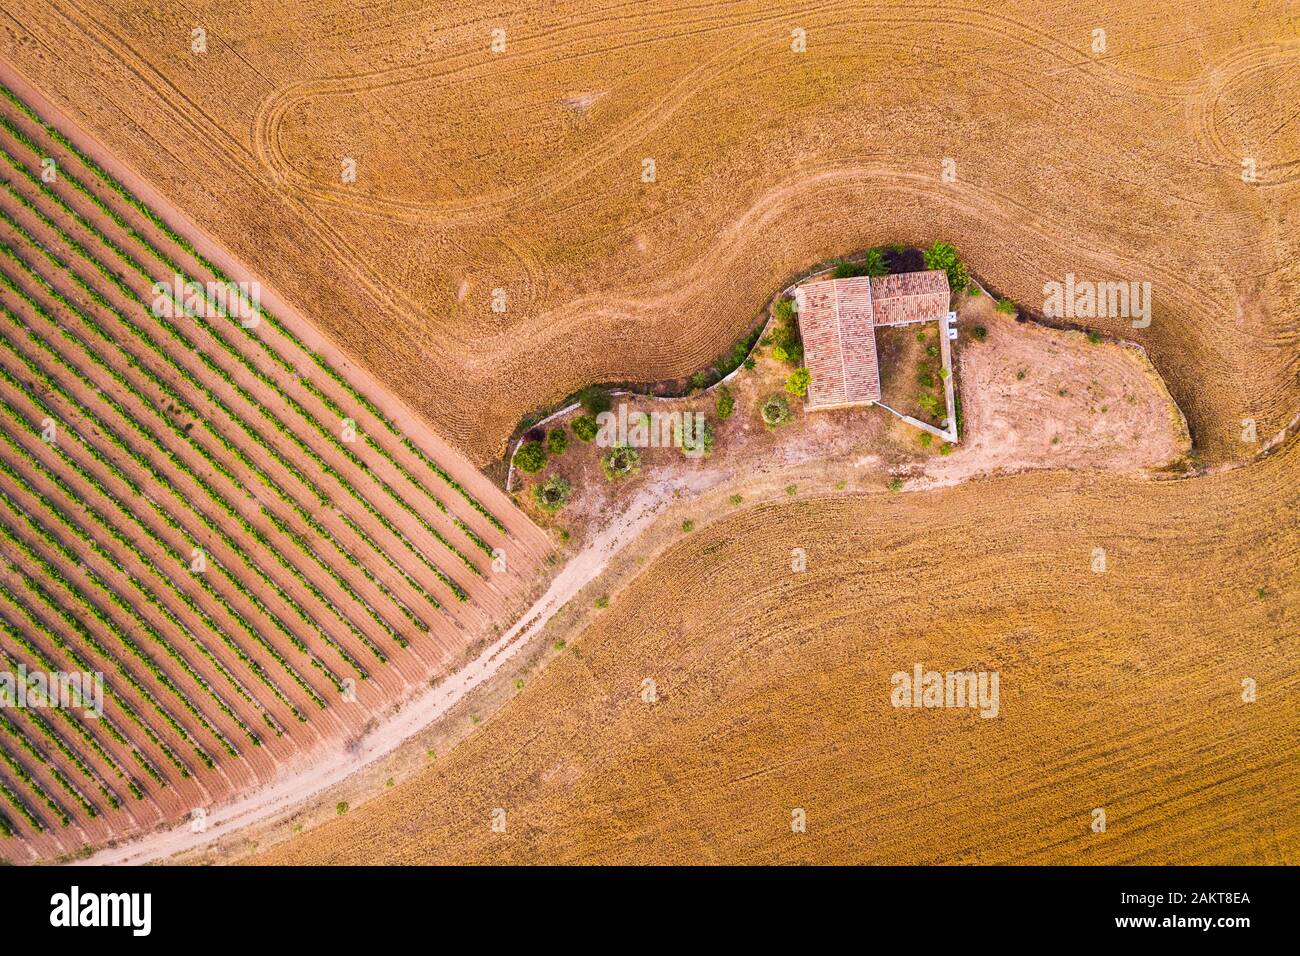 Agriculture landscape. Aerial view. Stock Photo